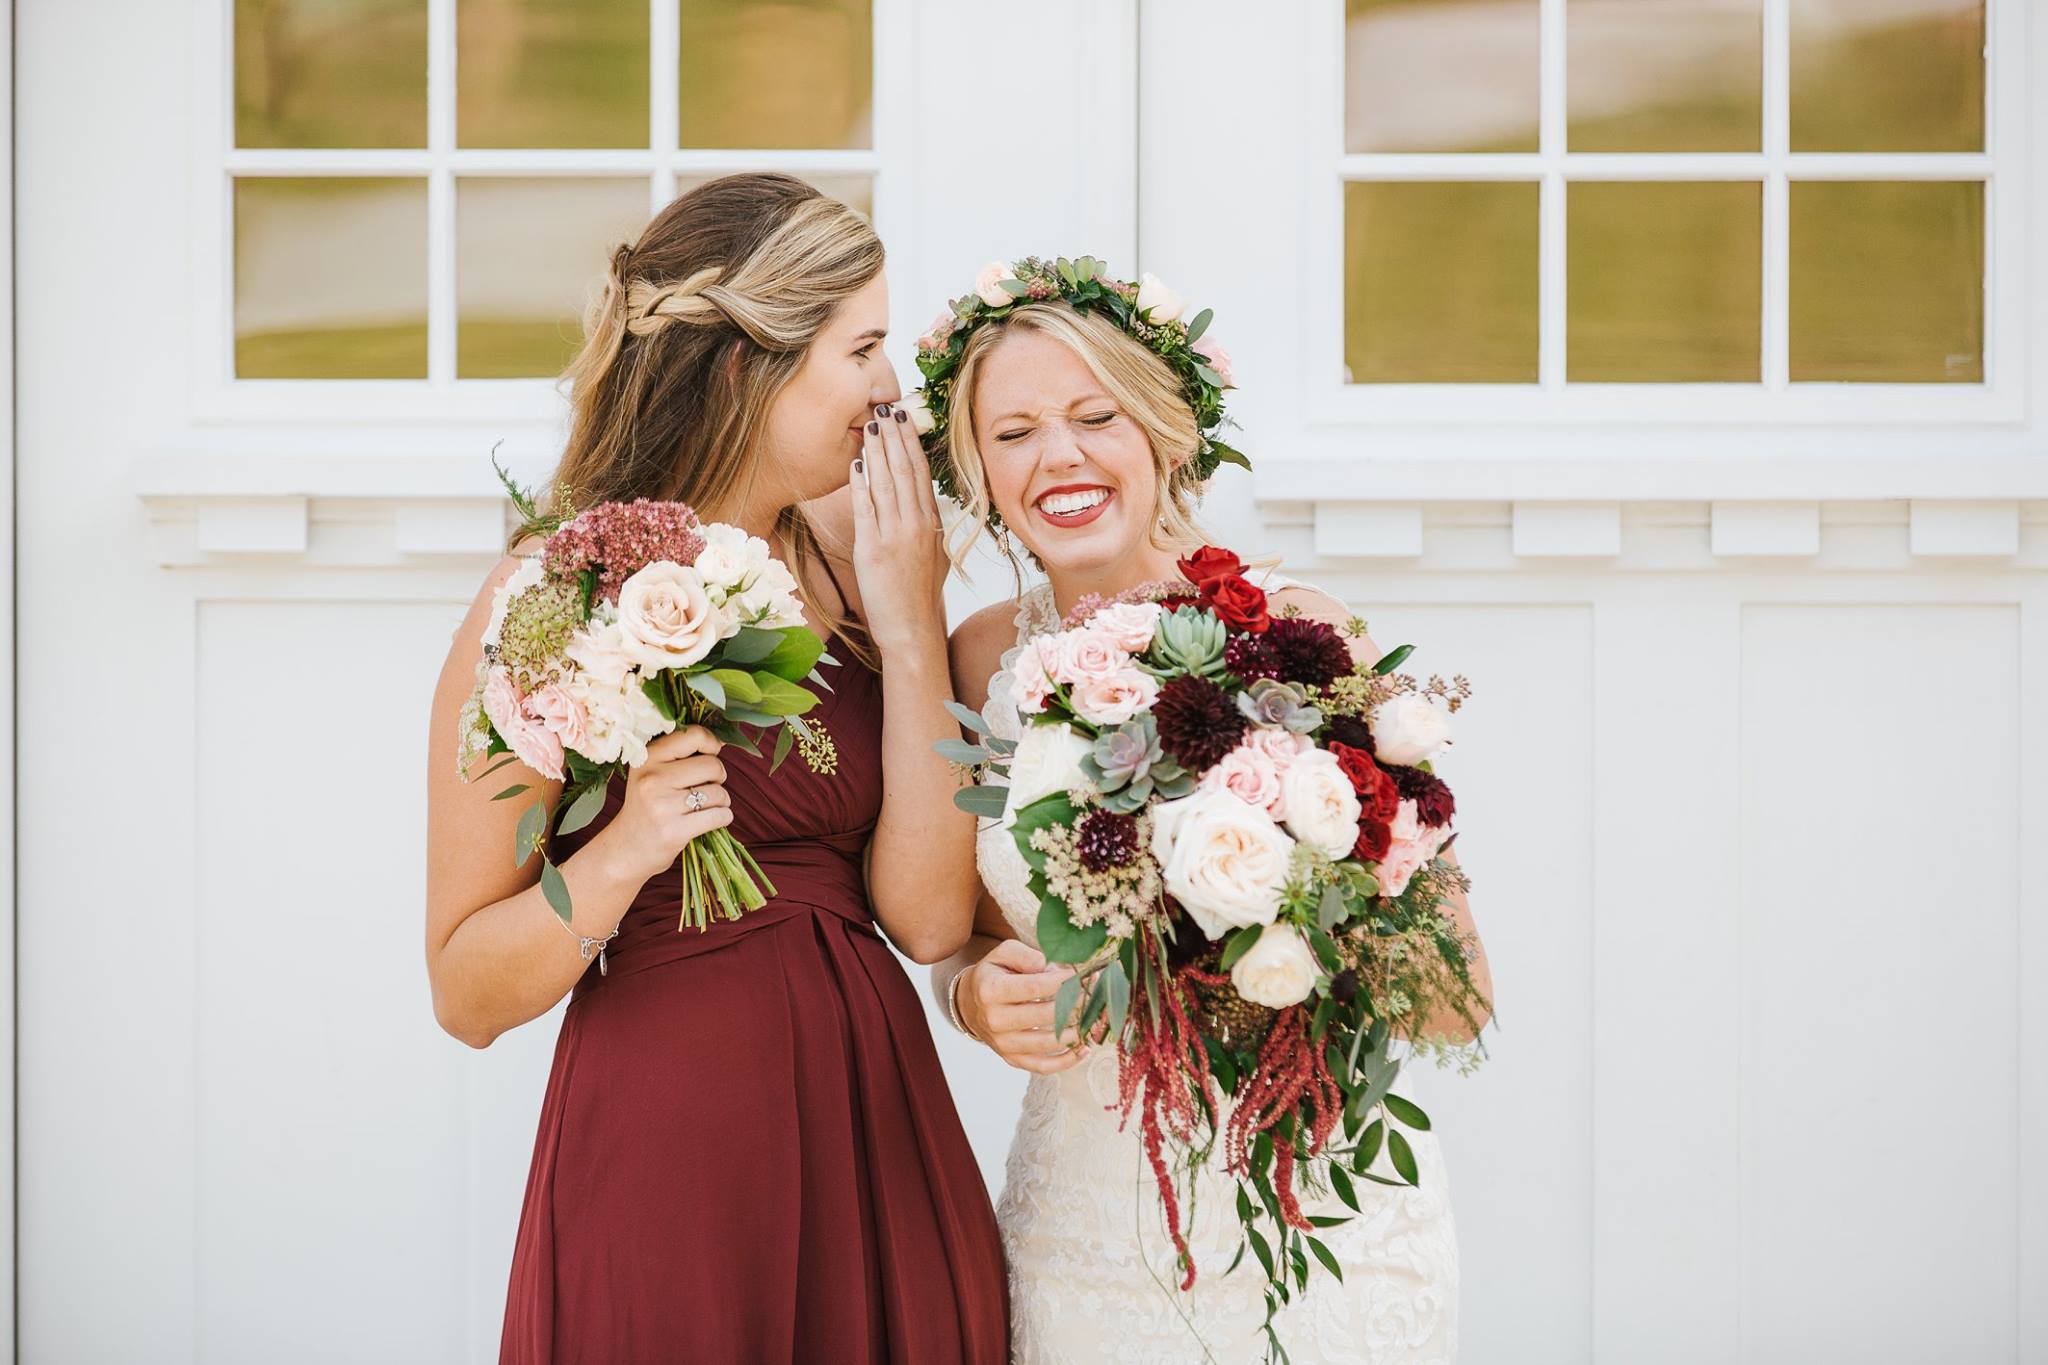 Smiling bride and bridesmaid holding bouquets with roses and succulents from Flowers by Tami by Rich Smith Photography | The Pink Bride® www.thepinkbride.com